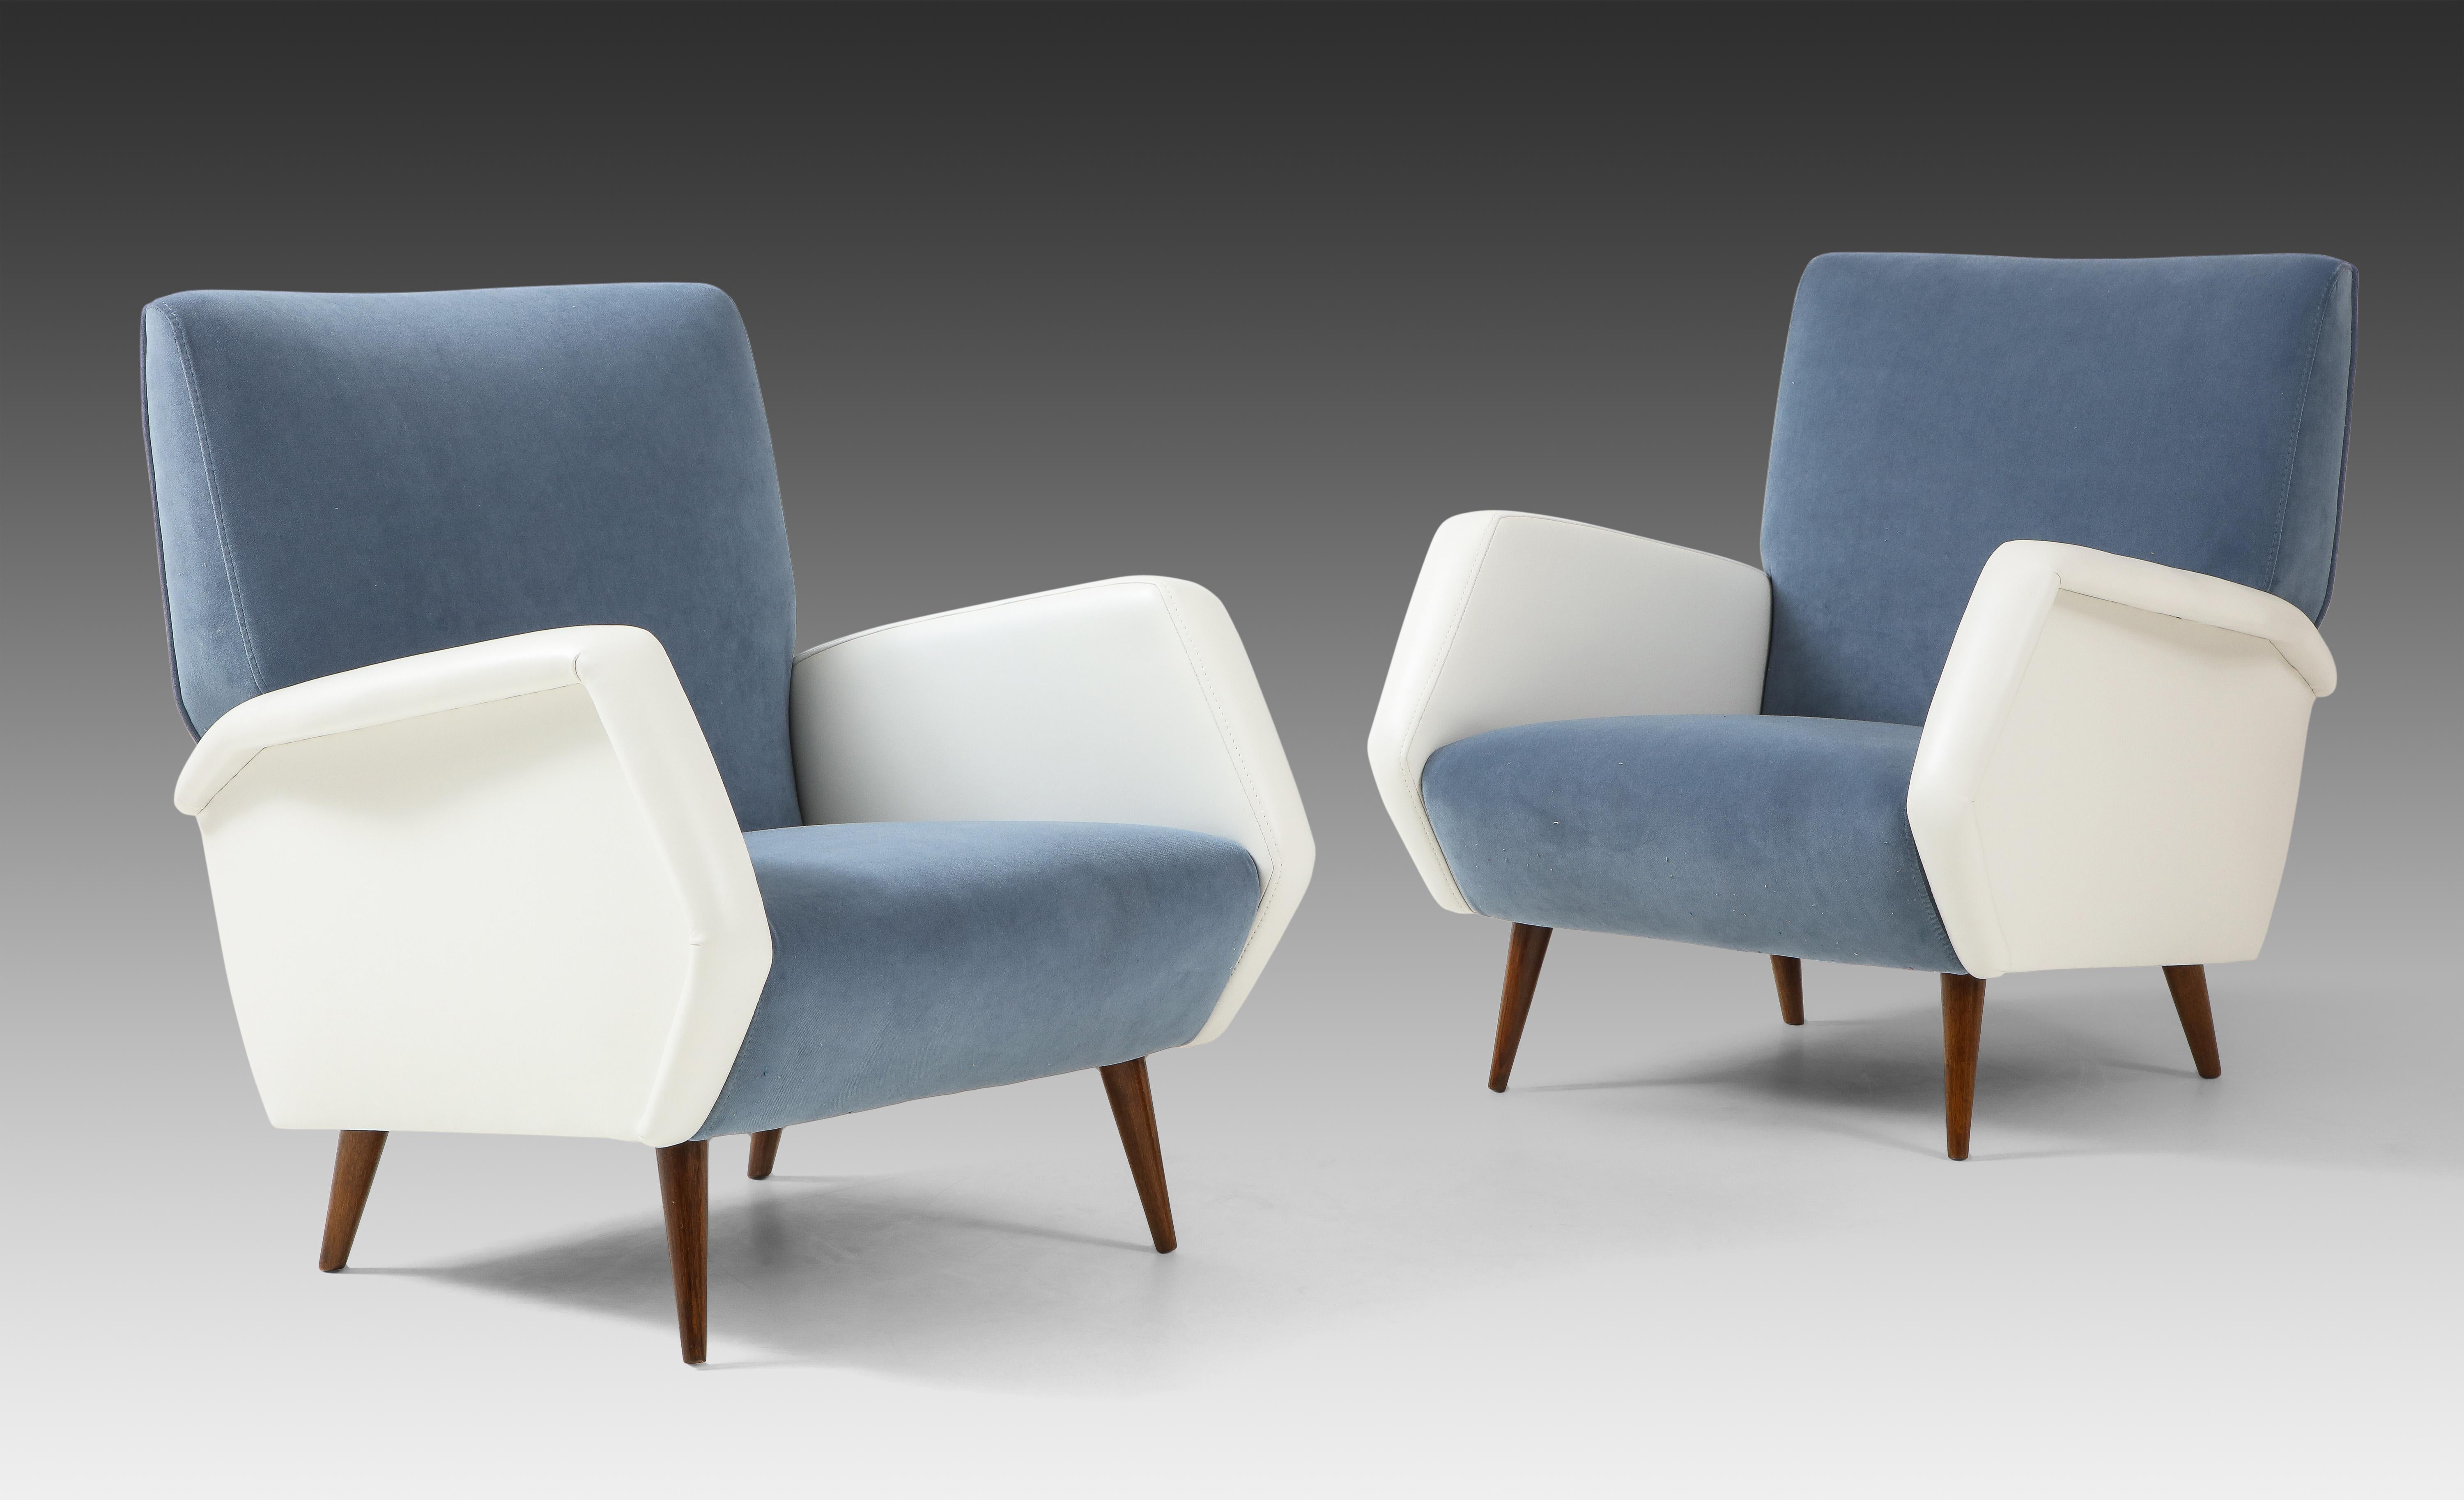 Gio Ponti for Cassina iconic pair of armchairs model 803 with sky blue velvet upholstered back and seat, faux leather sculptural arms, and rosewood legs, Italy, circa 1954.
Fully restored, newly upholstered and French polish on the